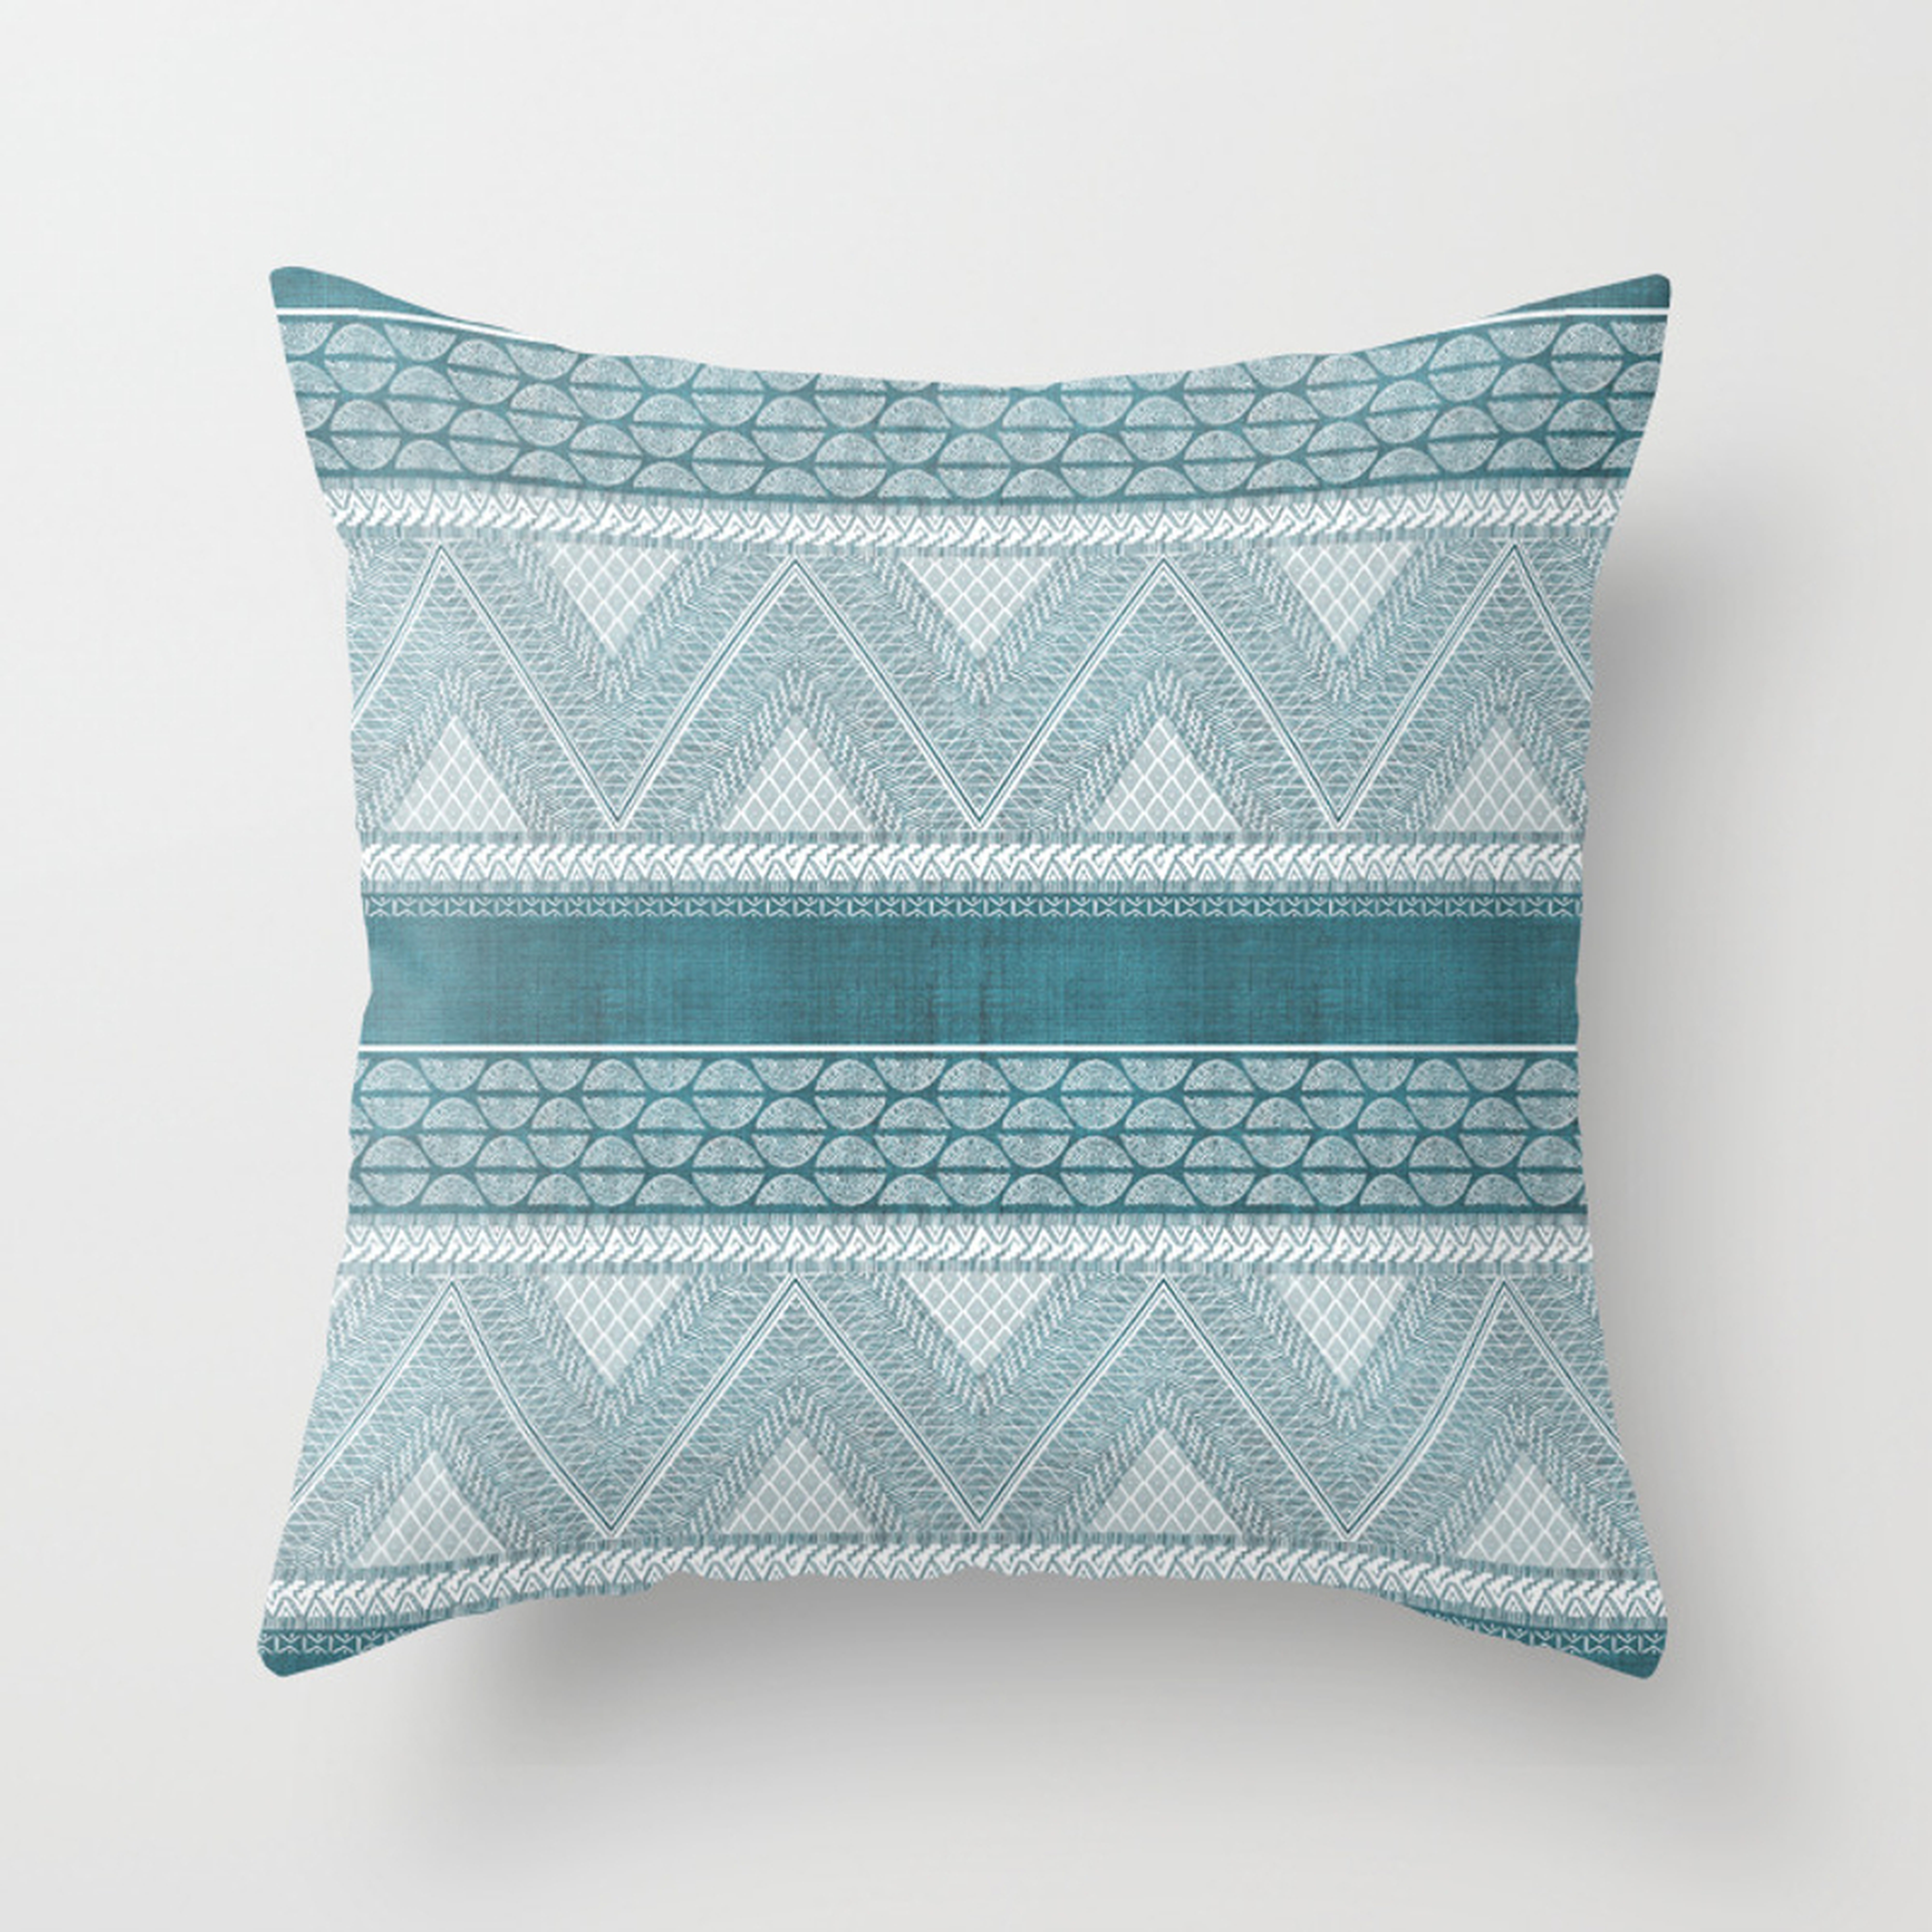 Dutch Wax Tribal Print In Teal Throw Pillow by House Of Haha - Cover (20" x 20") With Pillow Insert - Indoor Pillow - Society6